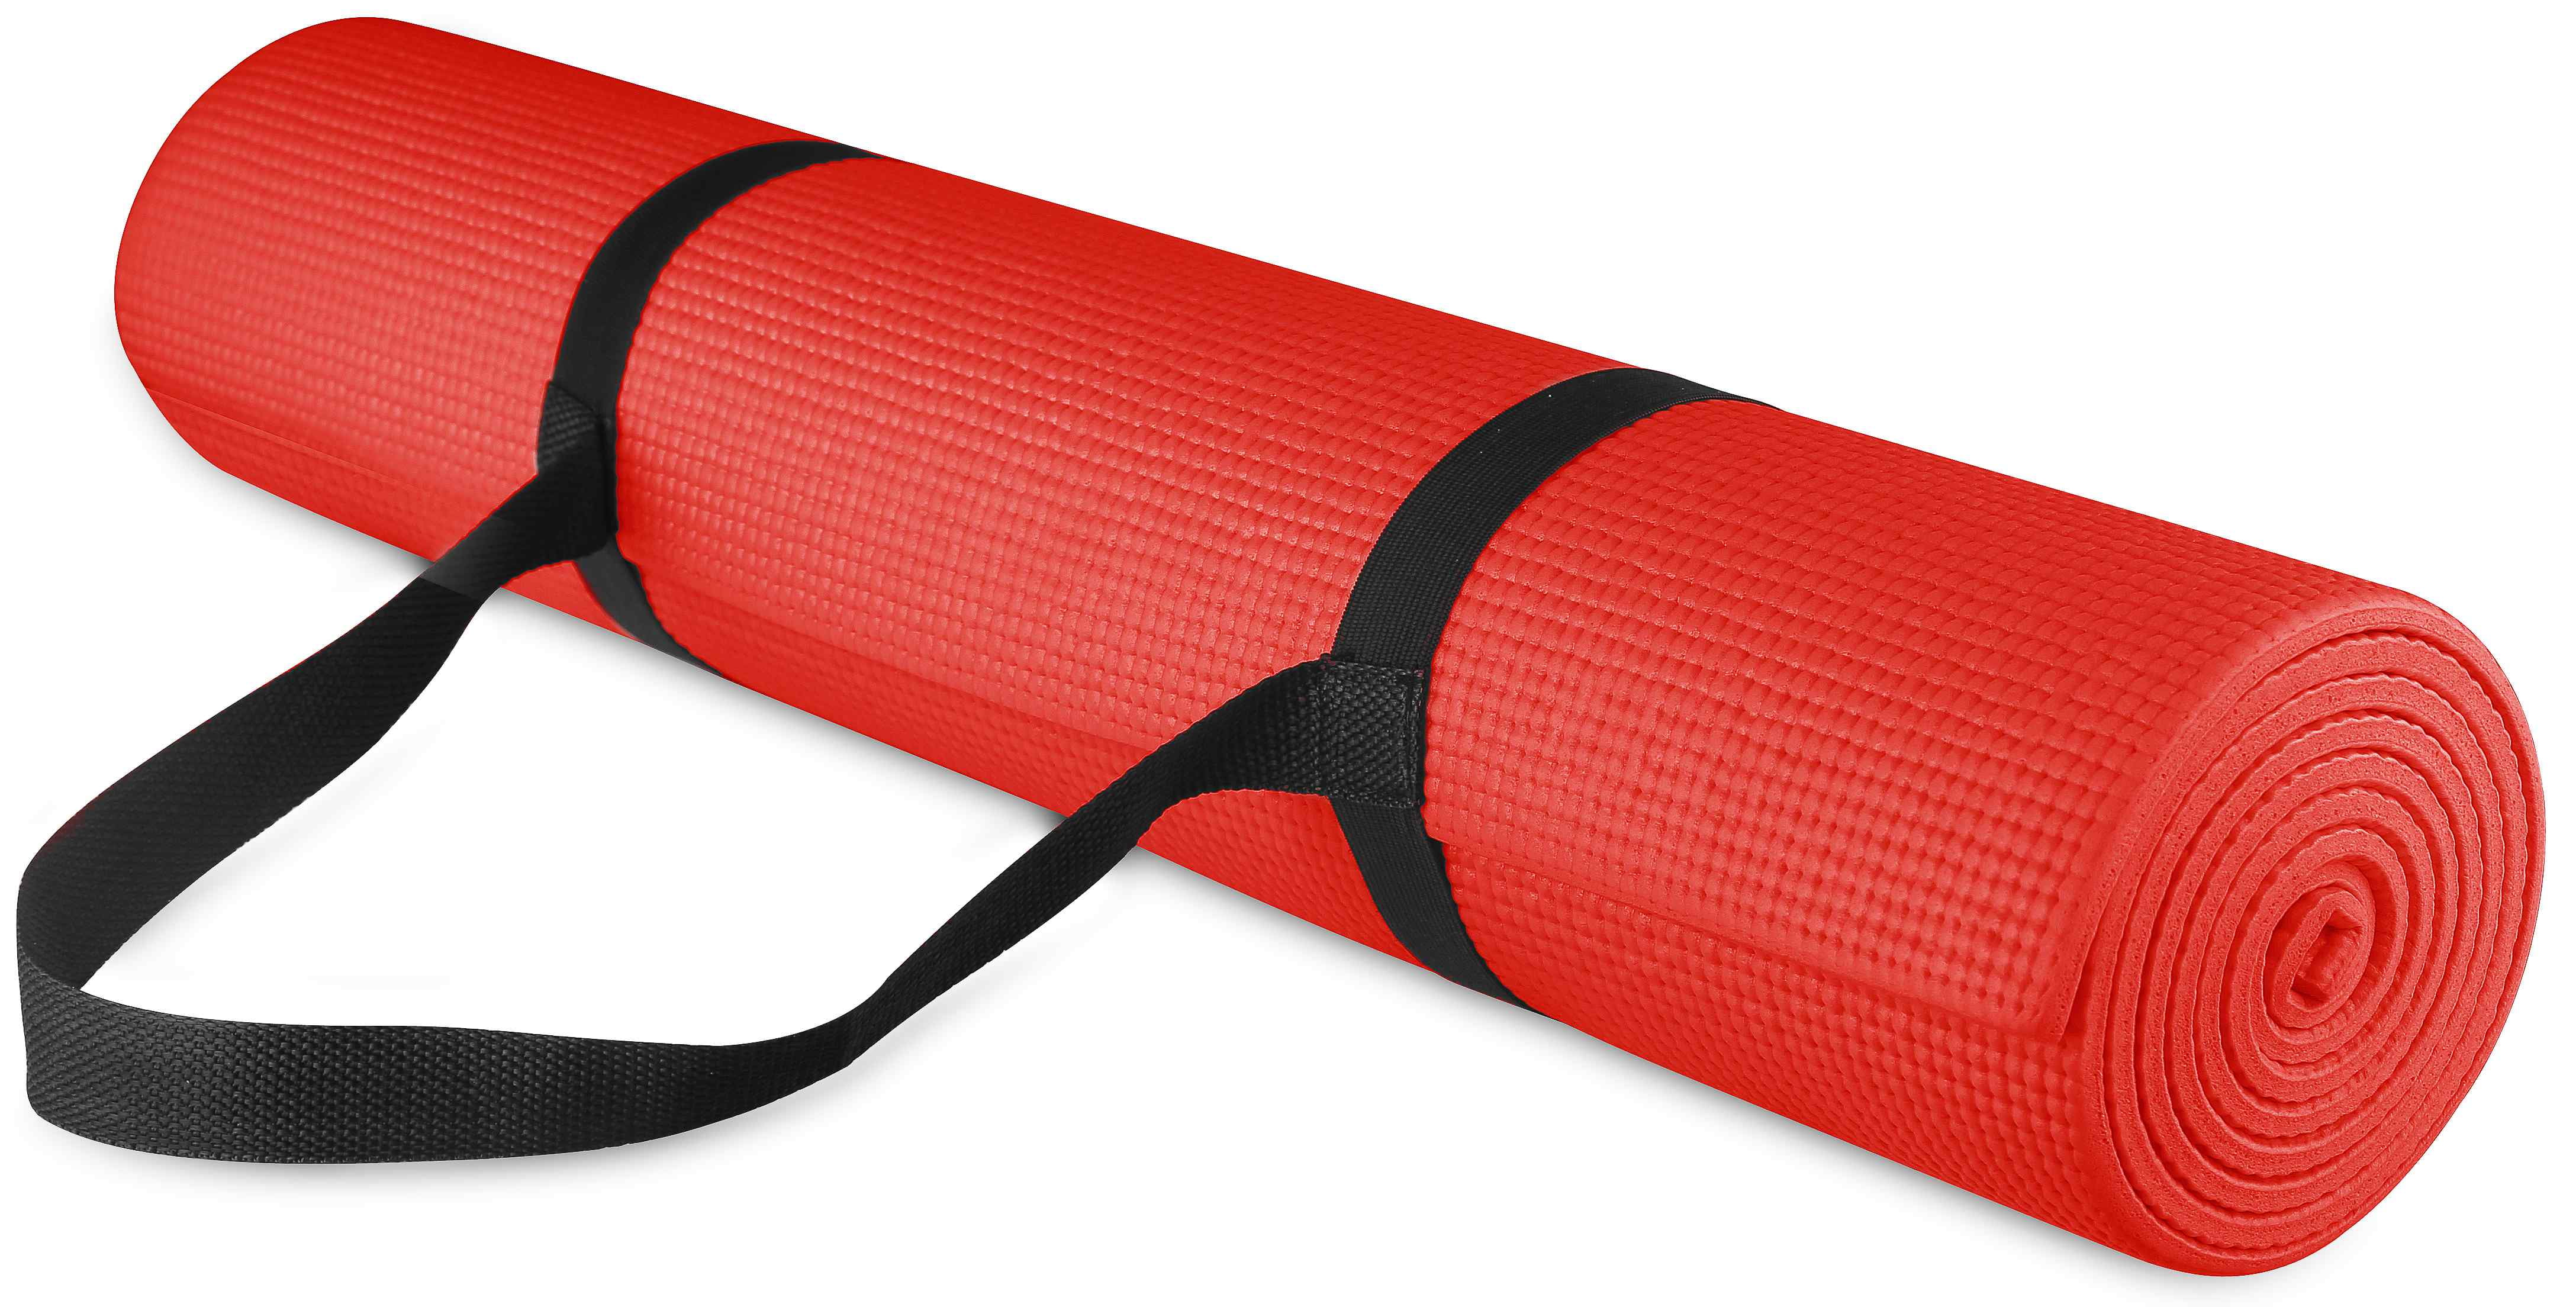 BalanceFrom GoYoga All Purpose High Density Non-Slip Exercise Yoga Mat with Carr 